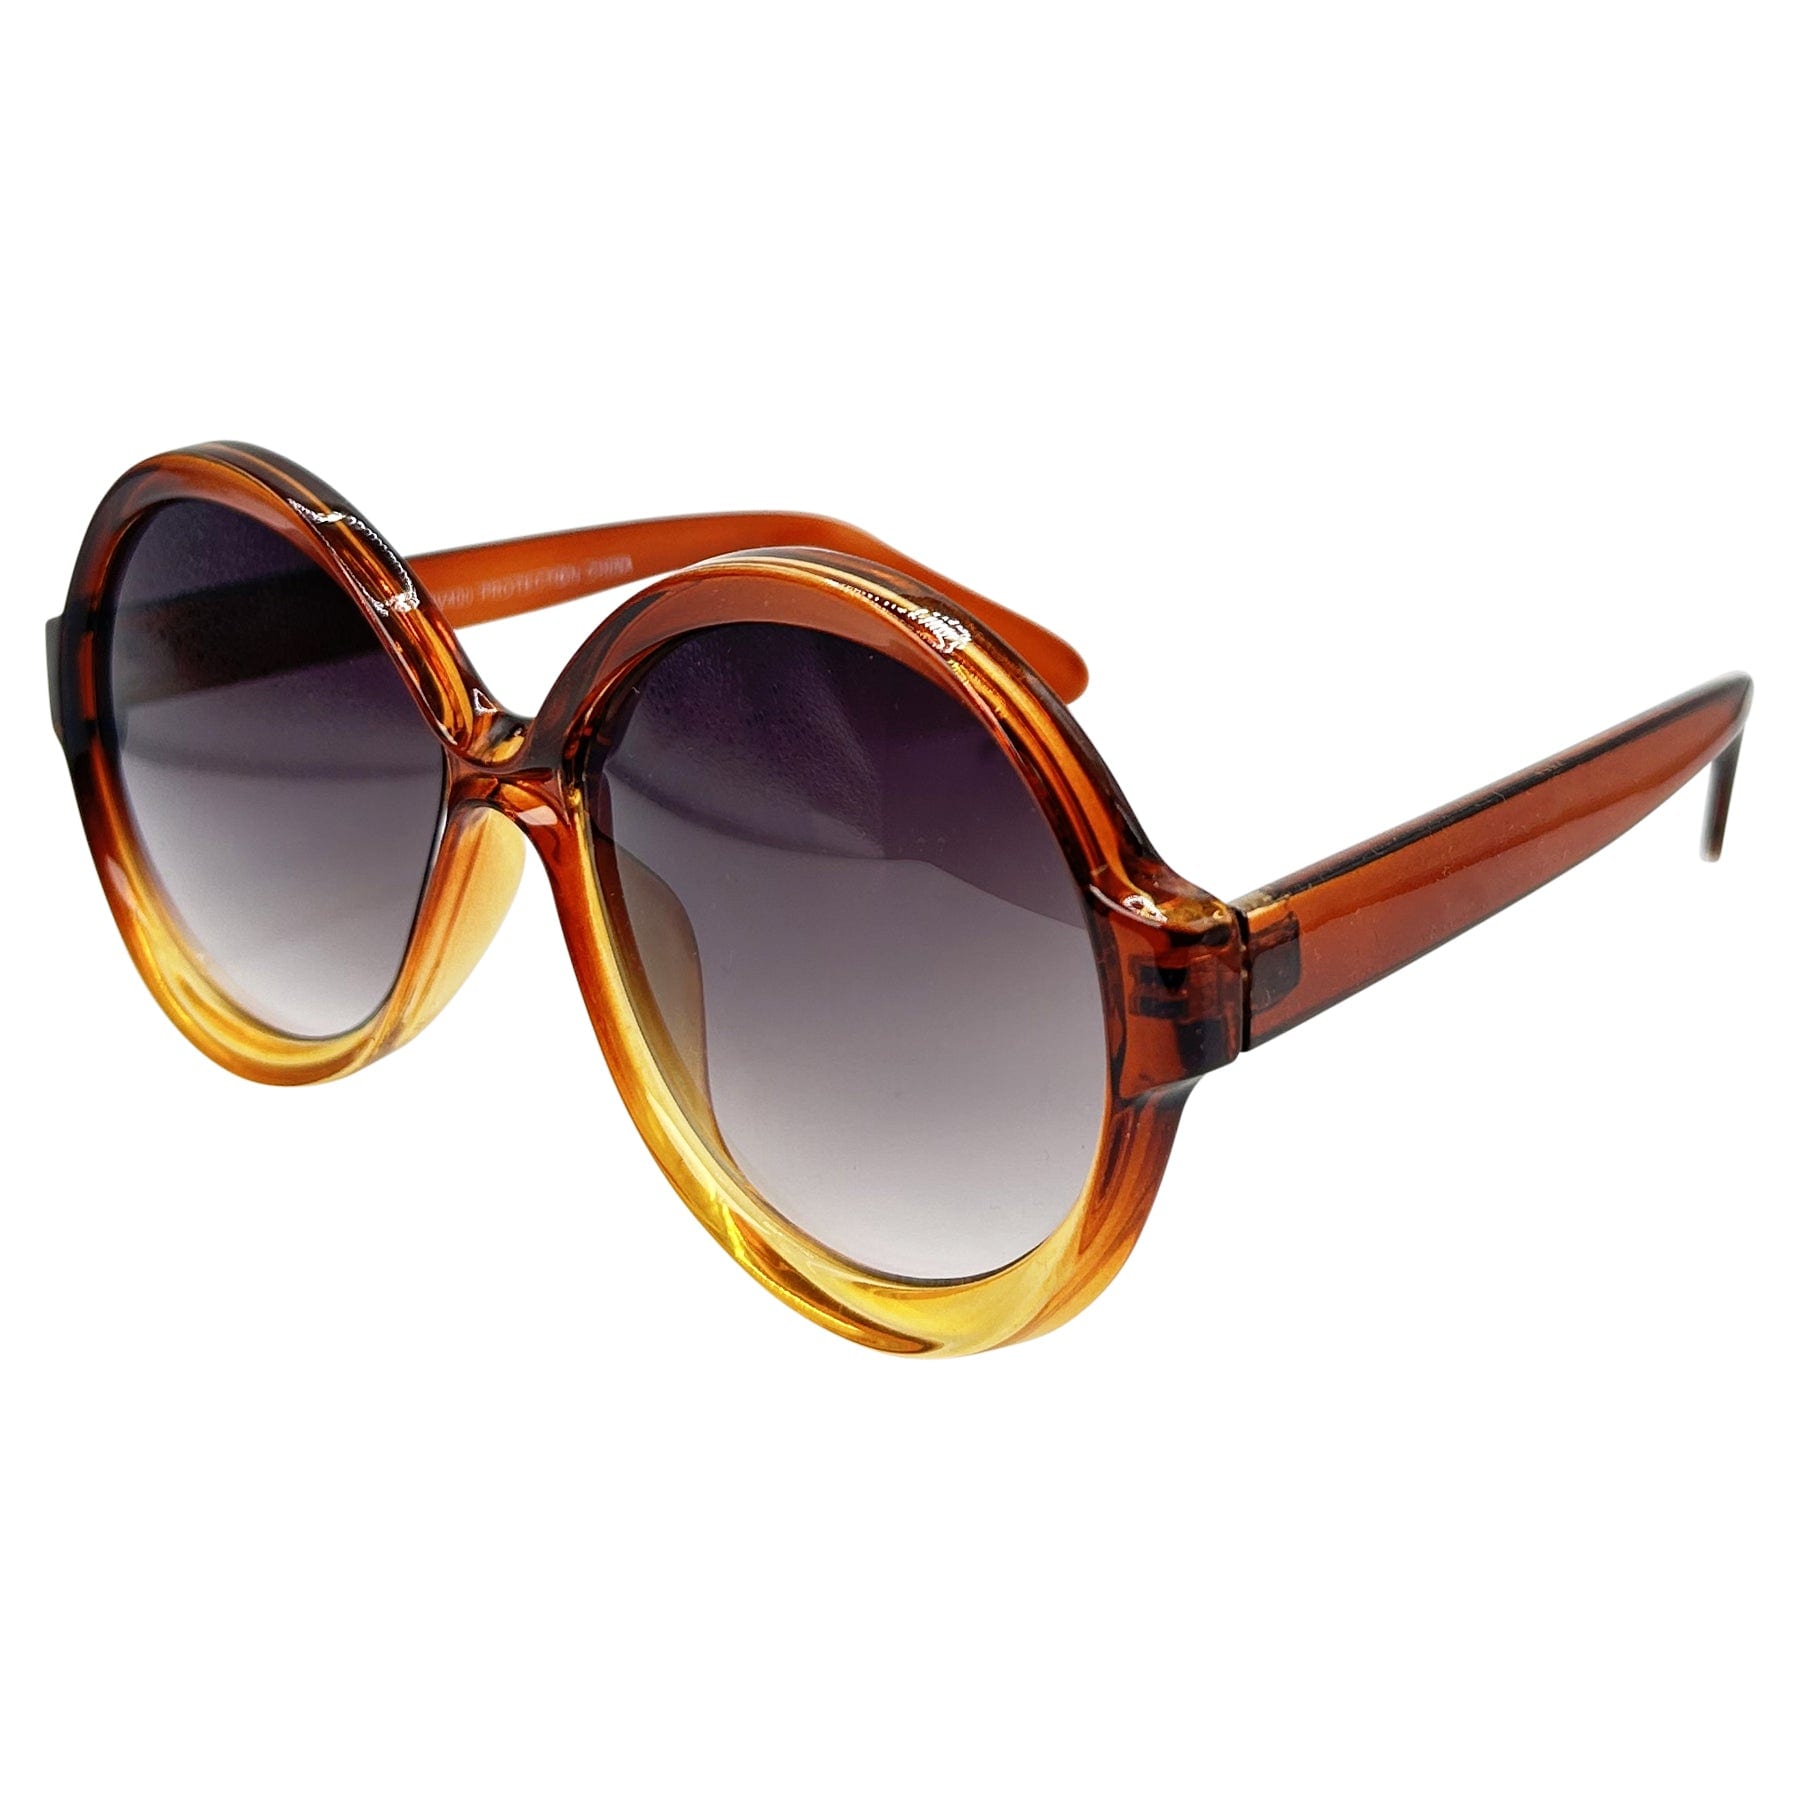 boho chic oversized sunglasses for women with a colorful ombre frame and round shape